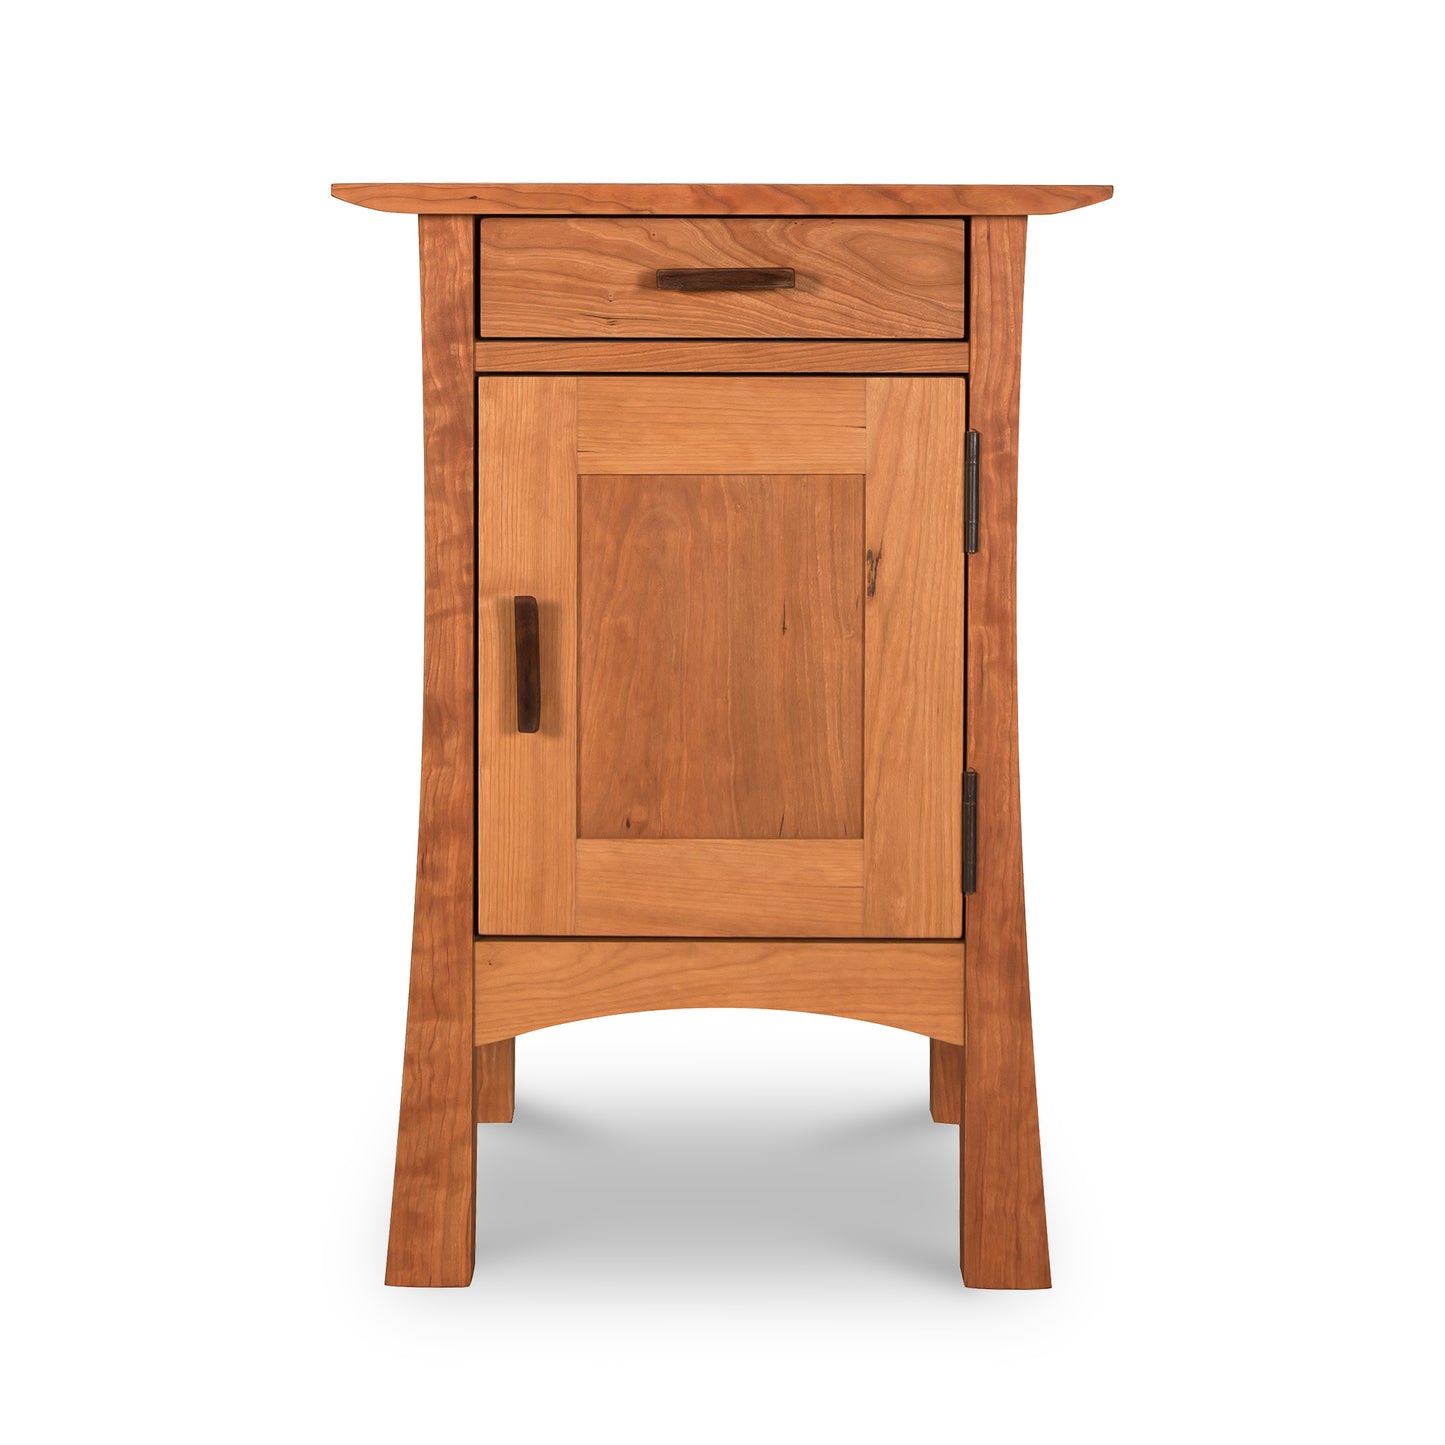 A wooden Vermont Furniture Designs Contemporary Craftsman 1-Drawer Nightstand with Door, standing against a white background, finished with eco-friendly oil for a modern bedroom ambiance.